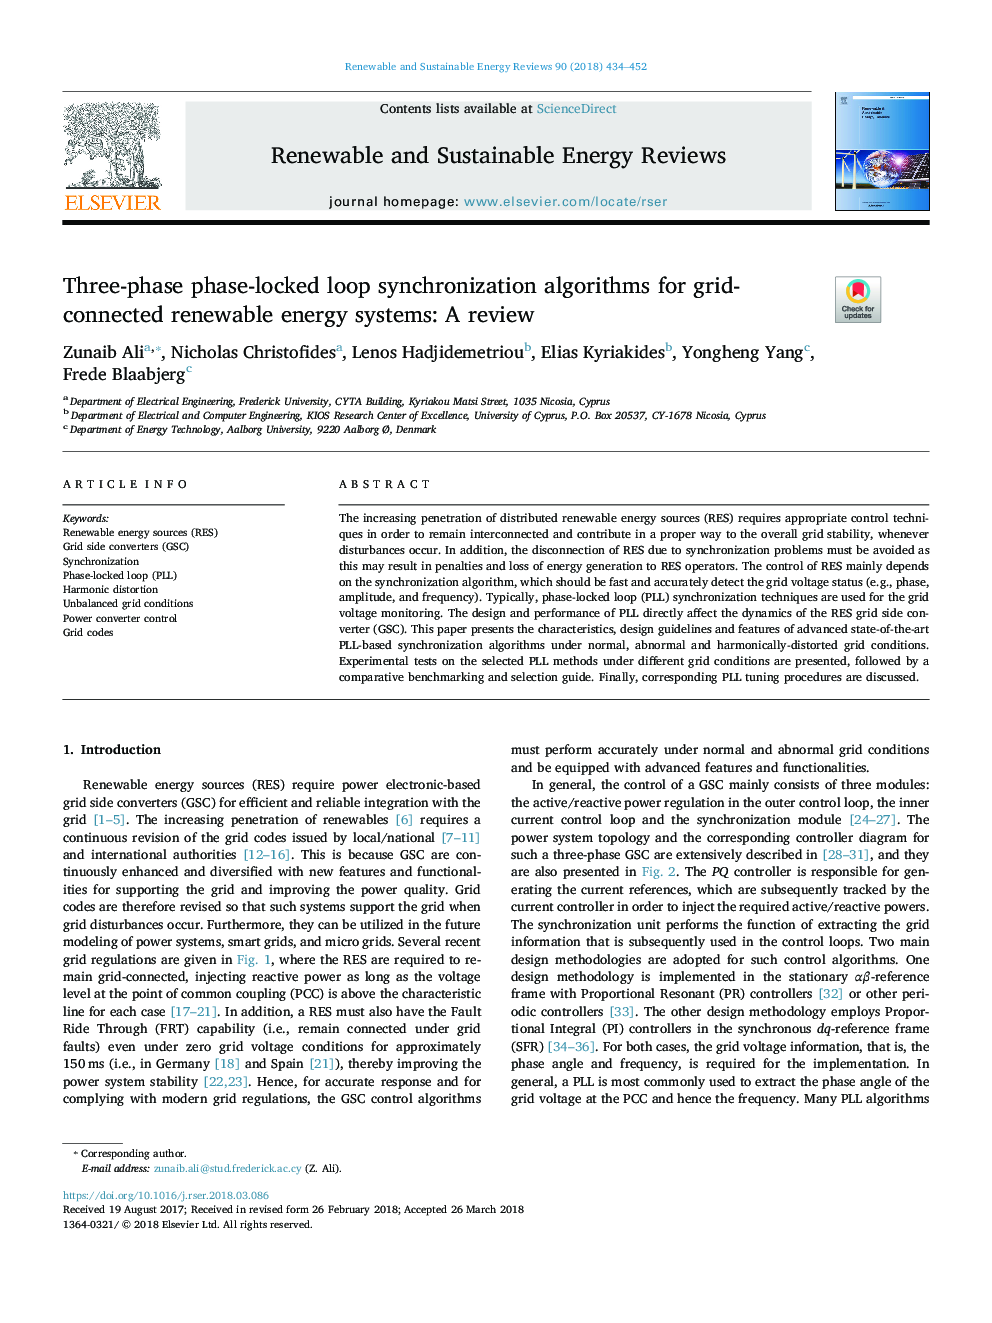 Three-phase phase-locked loop synchronization algorithms for grid-connected renewable energy systems: A review